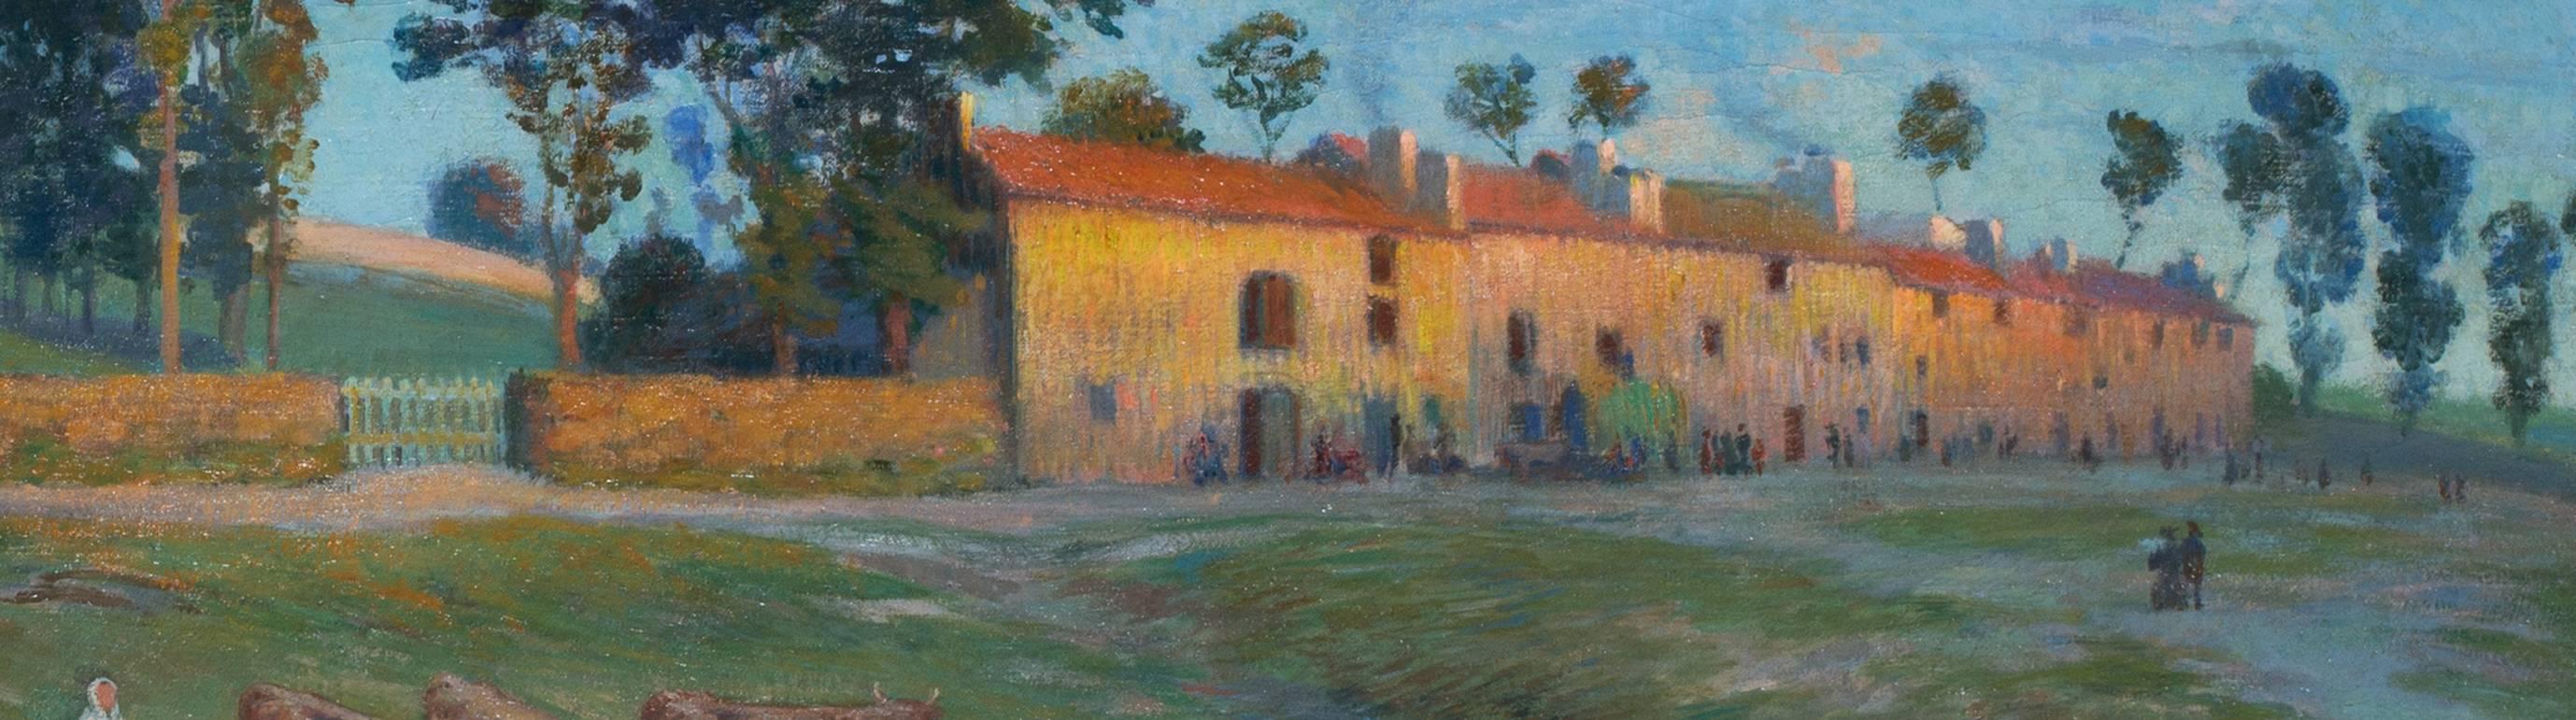 Lever du soleil, Yssingeaux  - Impressionist Painting by Gustave Poetzsch